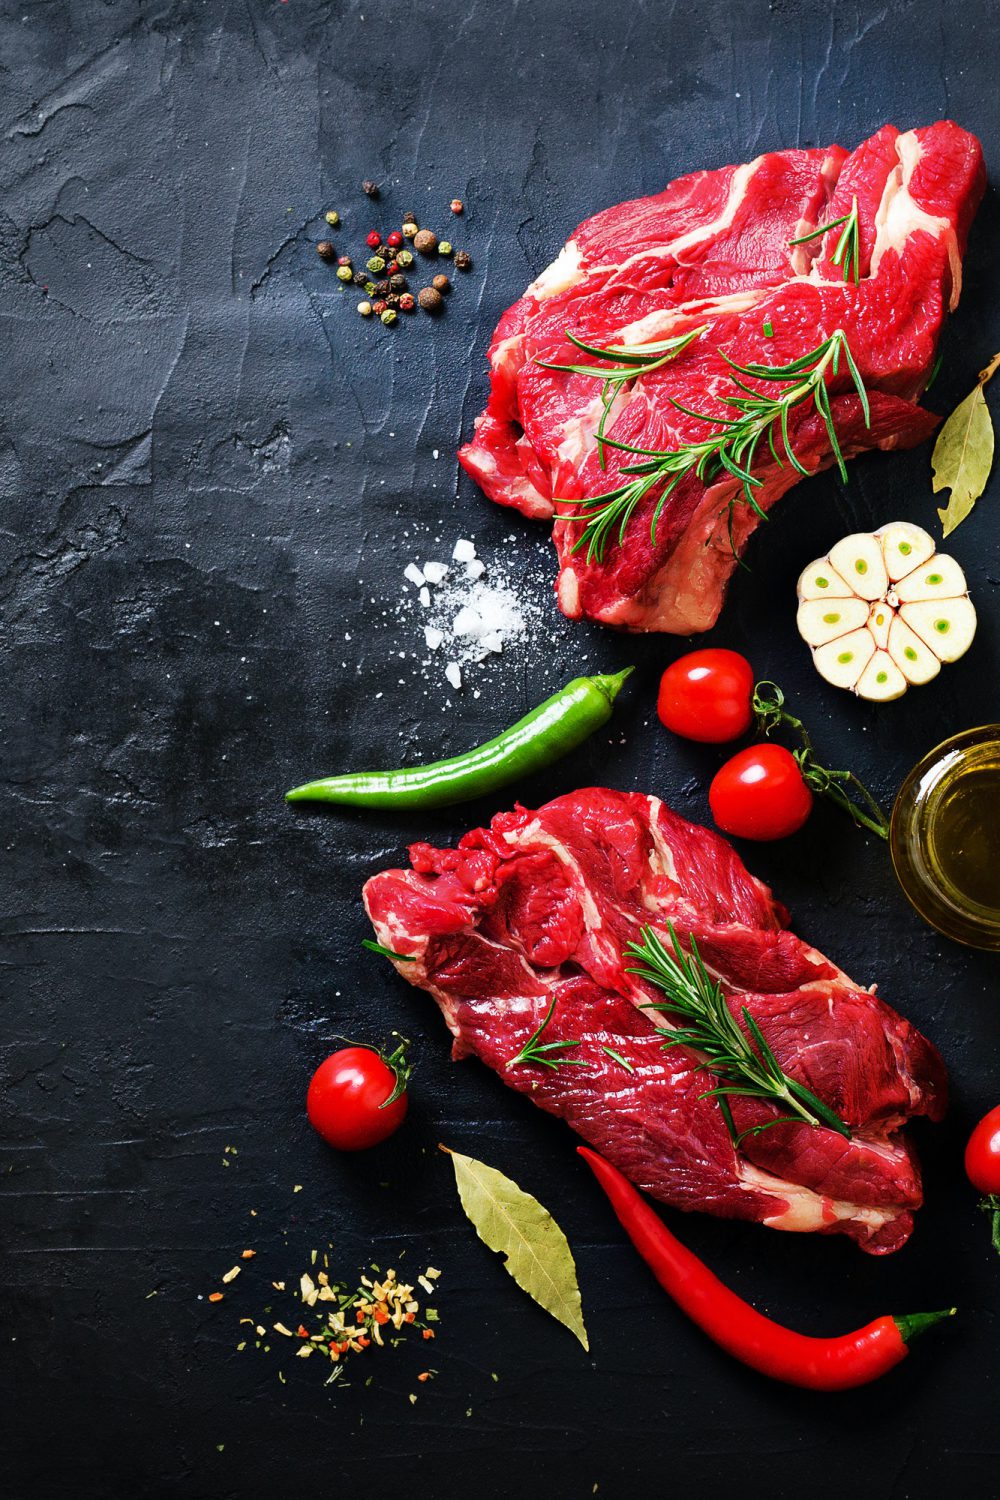 raw-meat-beef-steak-on-a-stone-cutting-board-with-rosemary-spices-salt-oil-cherry-tomatoes-hot.jpg